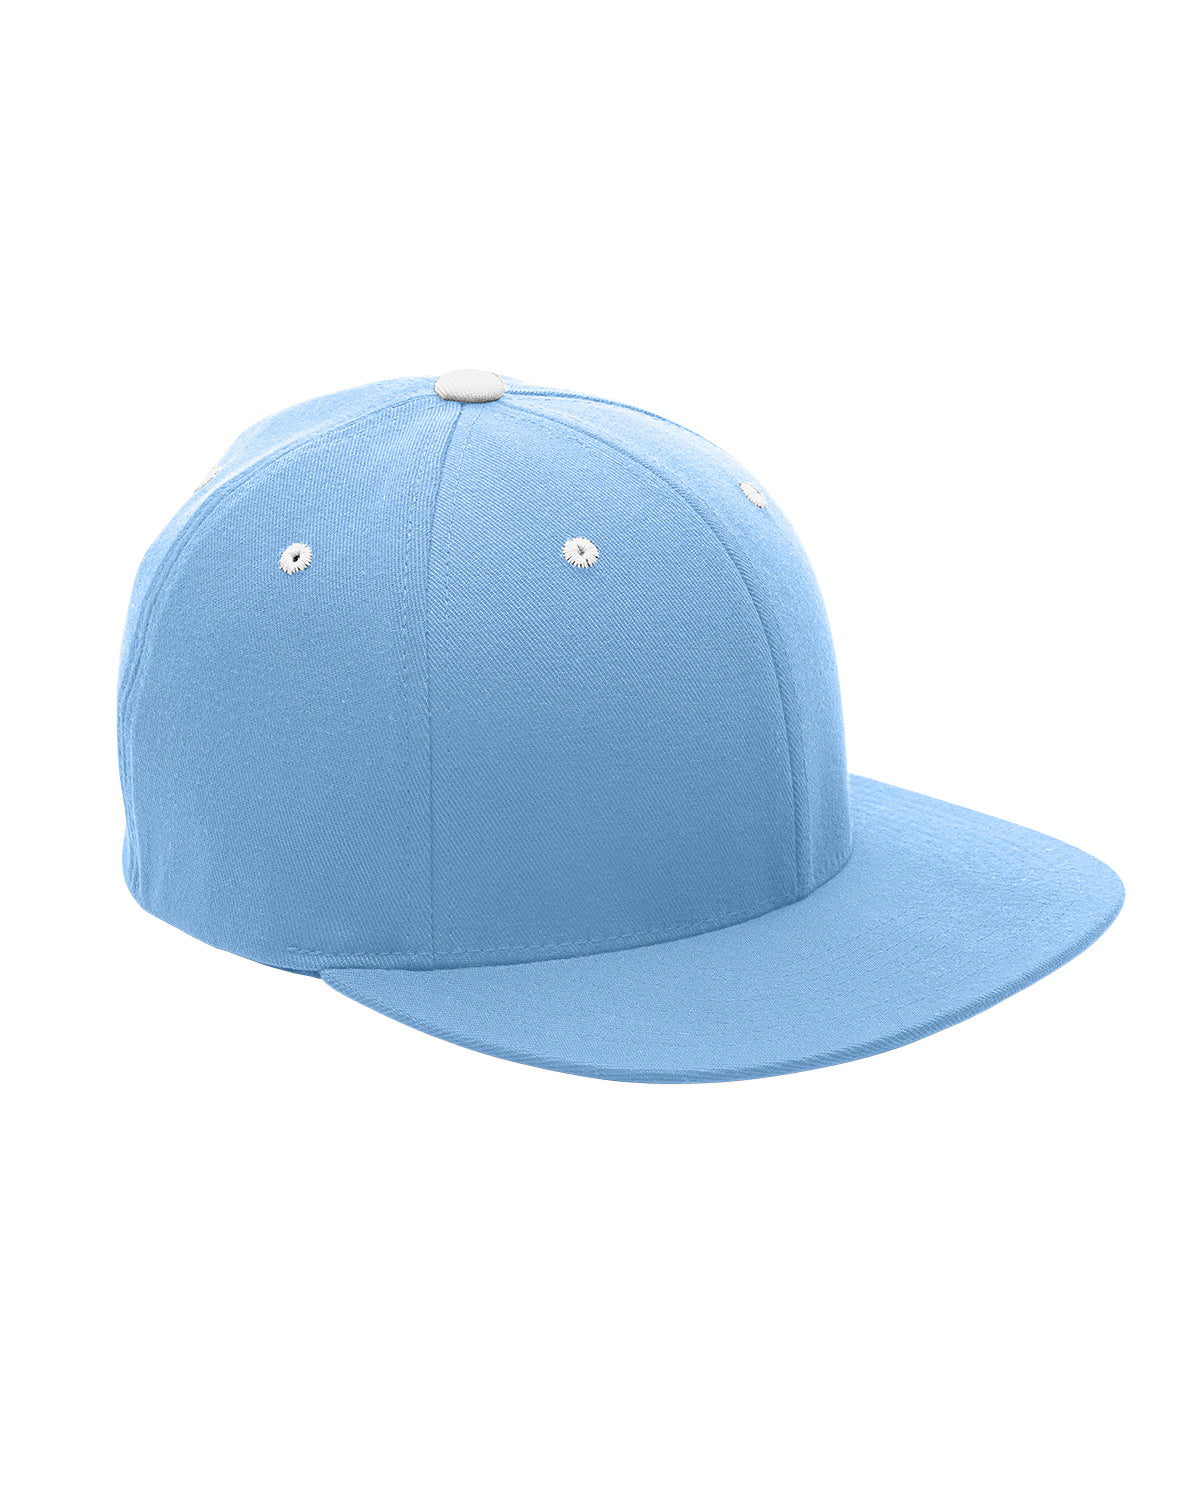 Team 365 ATB101 Mens Moisture Wicking Stretch Fit Hat Light Blue Front